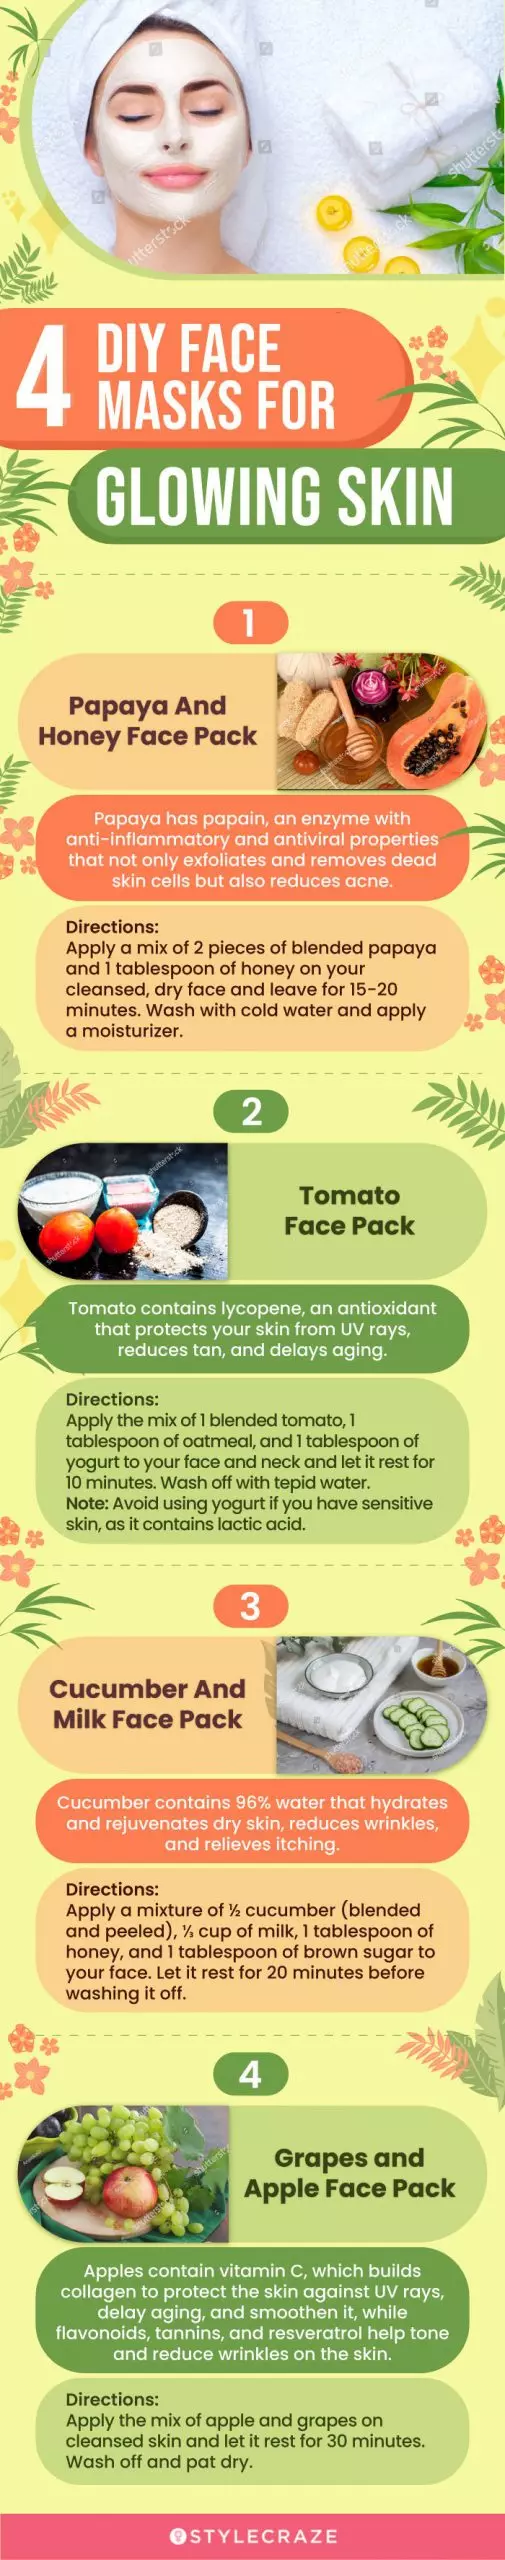 4 diy face masks for glowing skin (infographic)